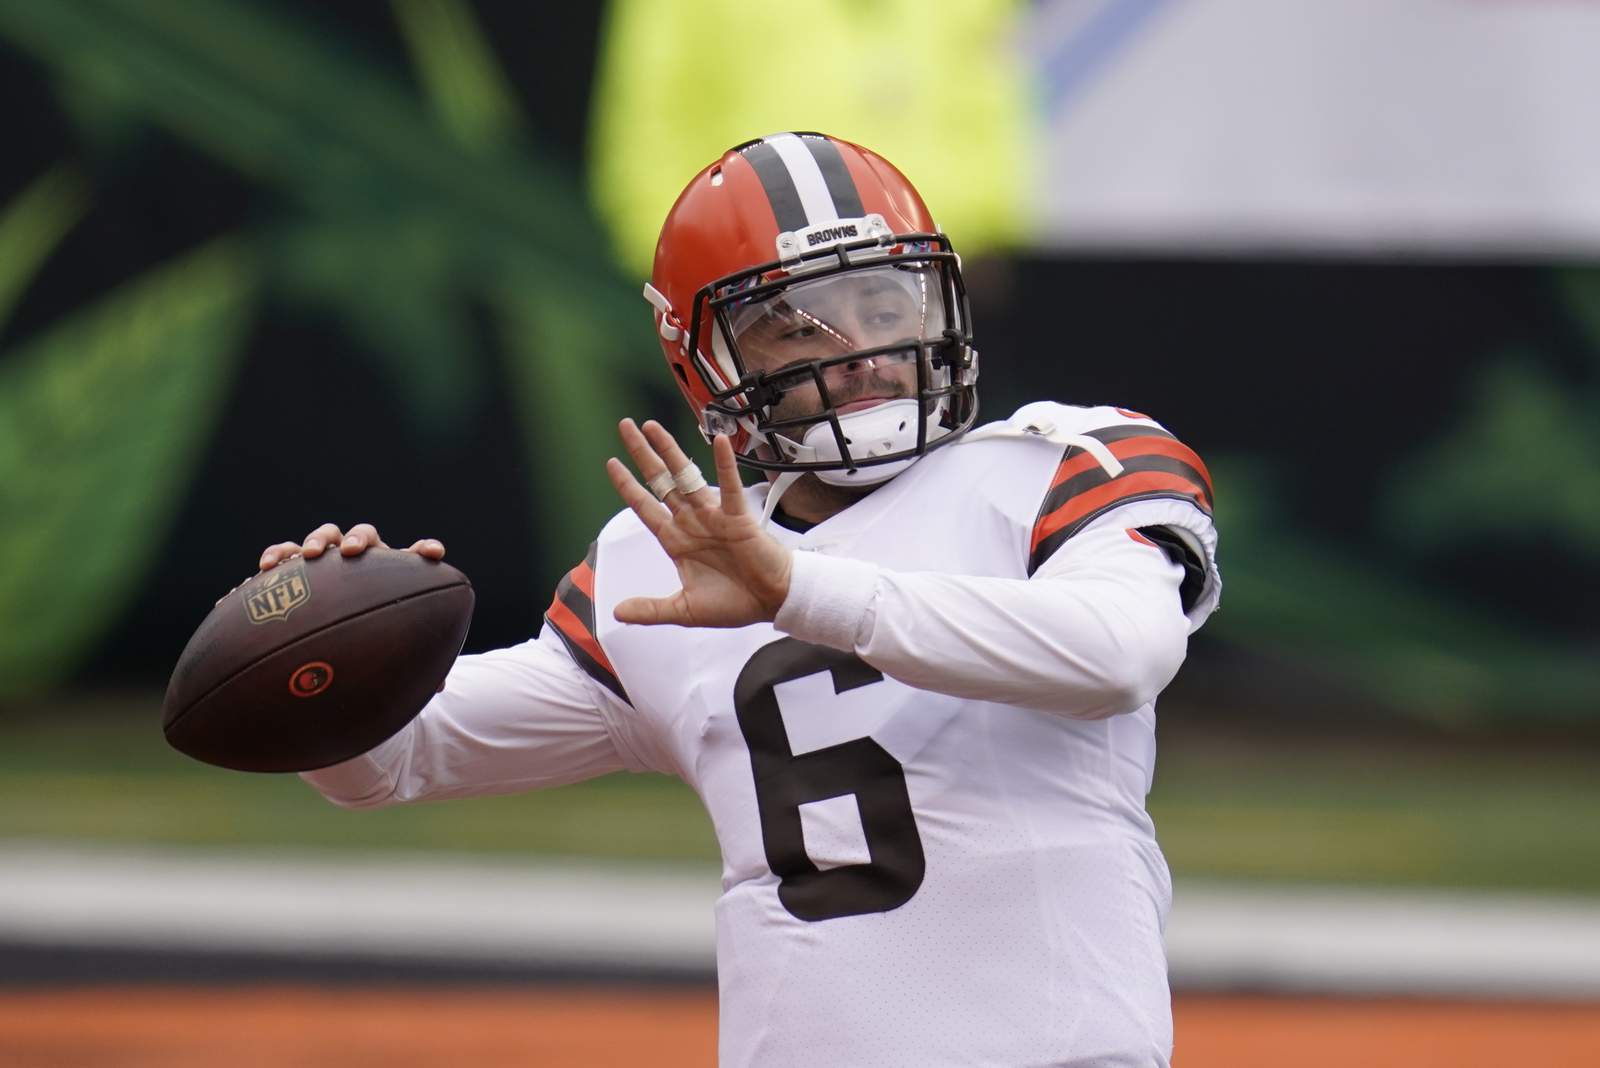 Browns place QB Baker Mayfield on COVID-19 list during bye